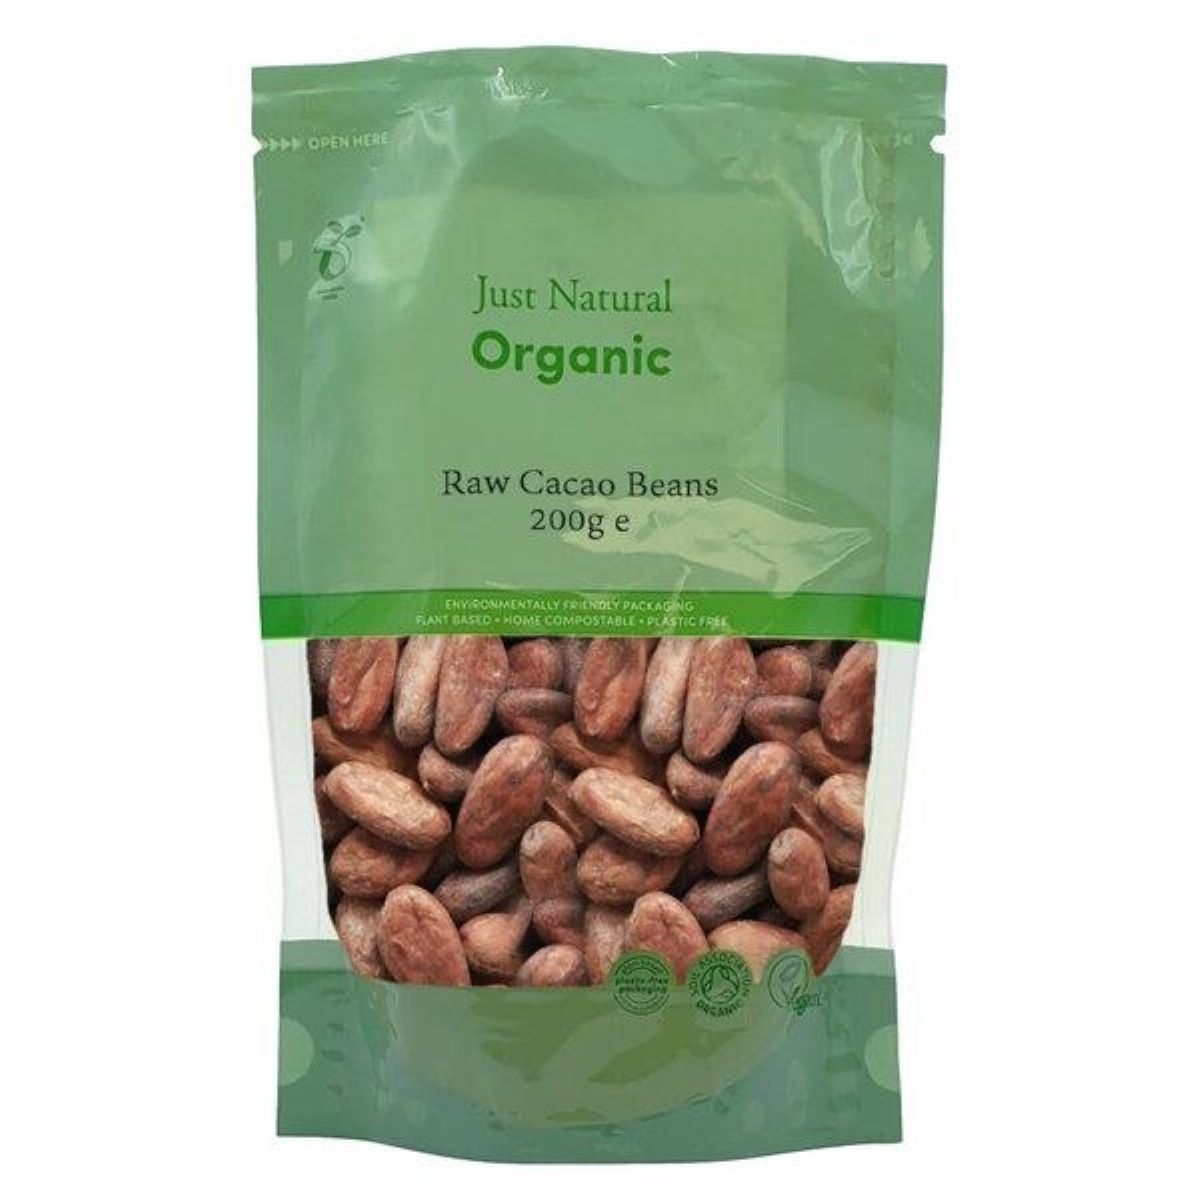 Just Natural Organic Raw Cacao Beans 200g